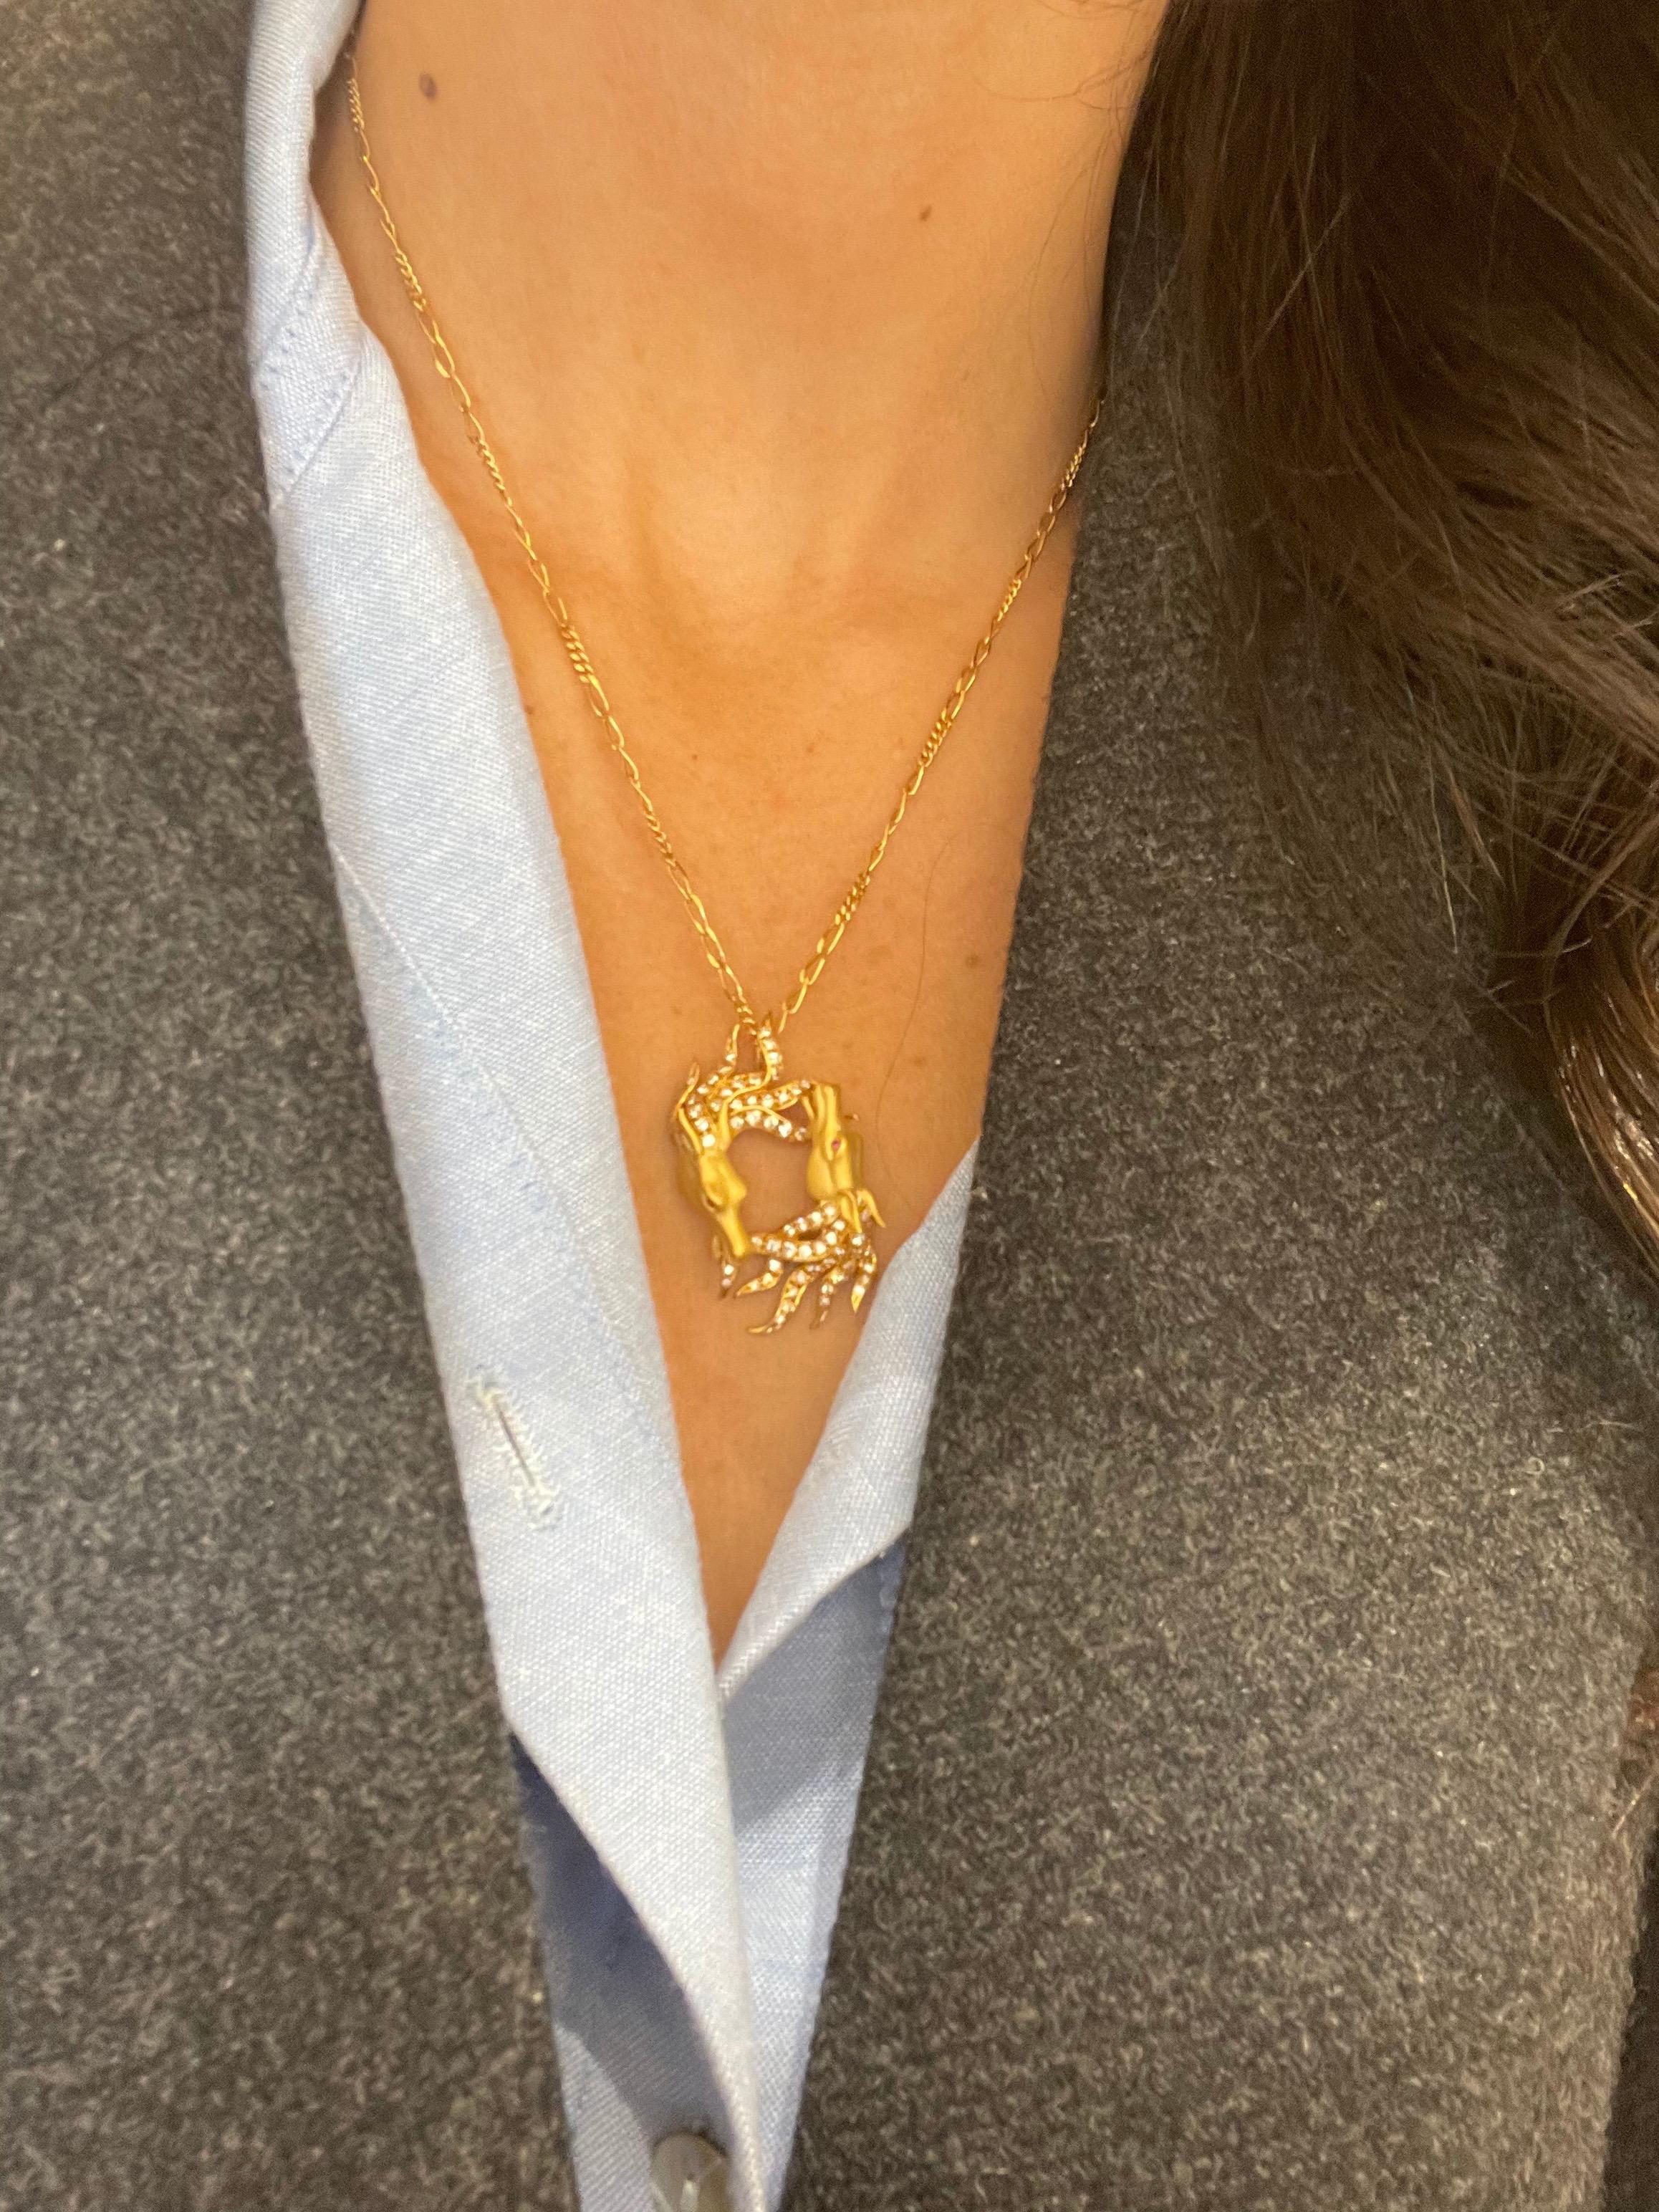 Carrera Y Carrera has built its famous name on figurative designs, an obsession with surface finishes, and a compelling way of seeing beauty in art and nature. This 18 karat yellow gold and diamond pendant is a perfect example of Carrera's iconic